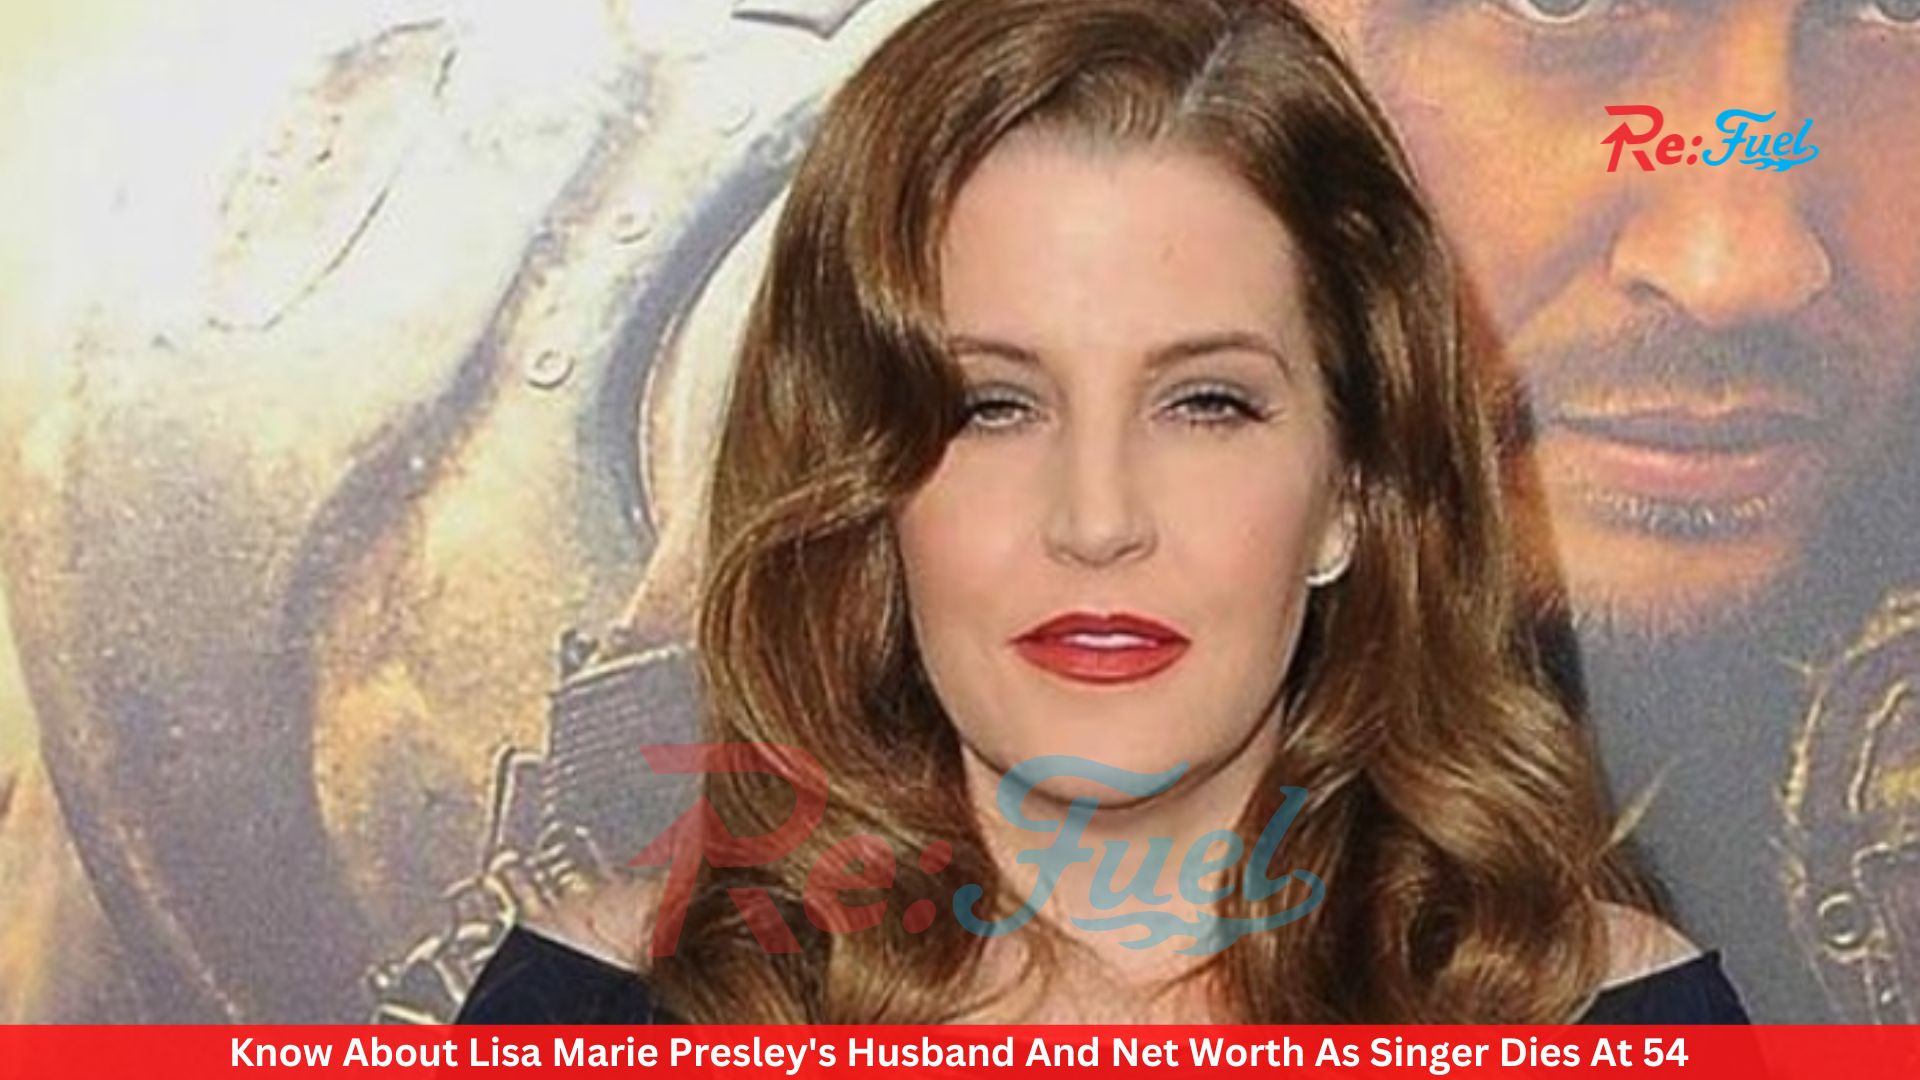 Know About Lisa Marie Presley's Husband And Net Worth As Singer Dies At 54